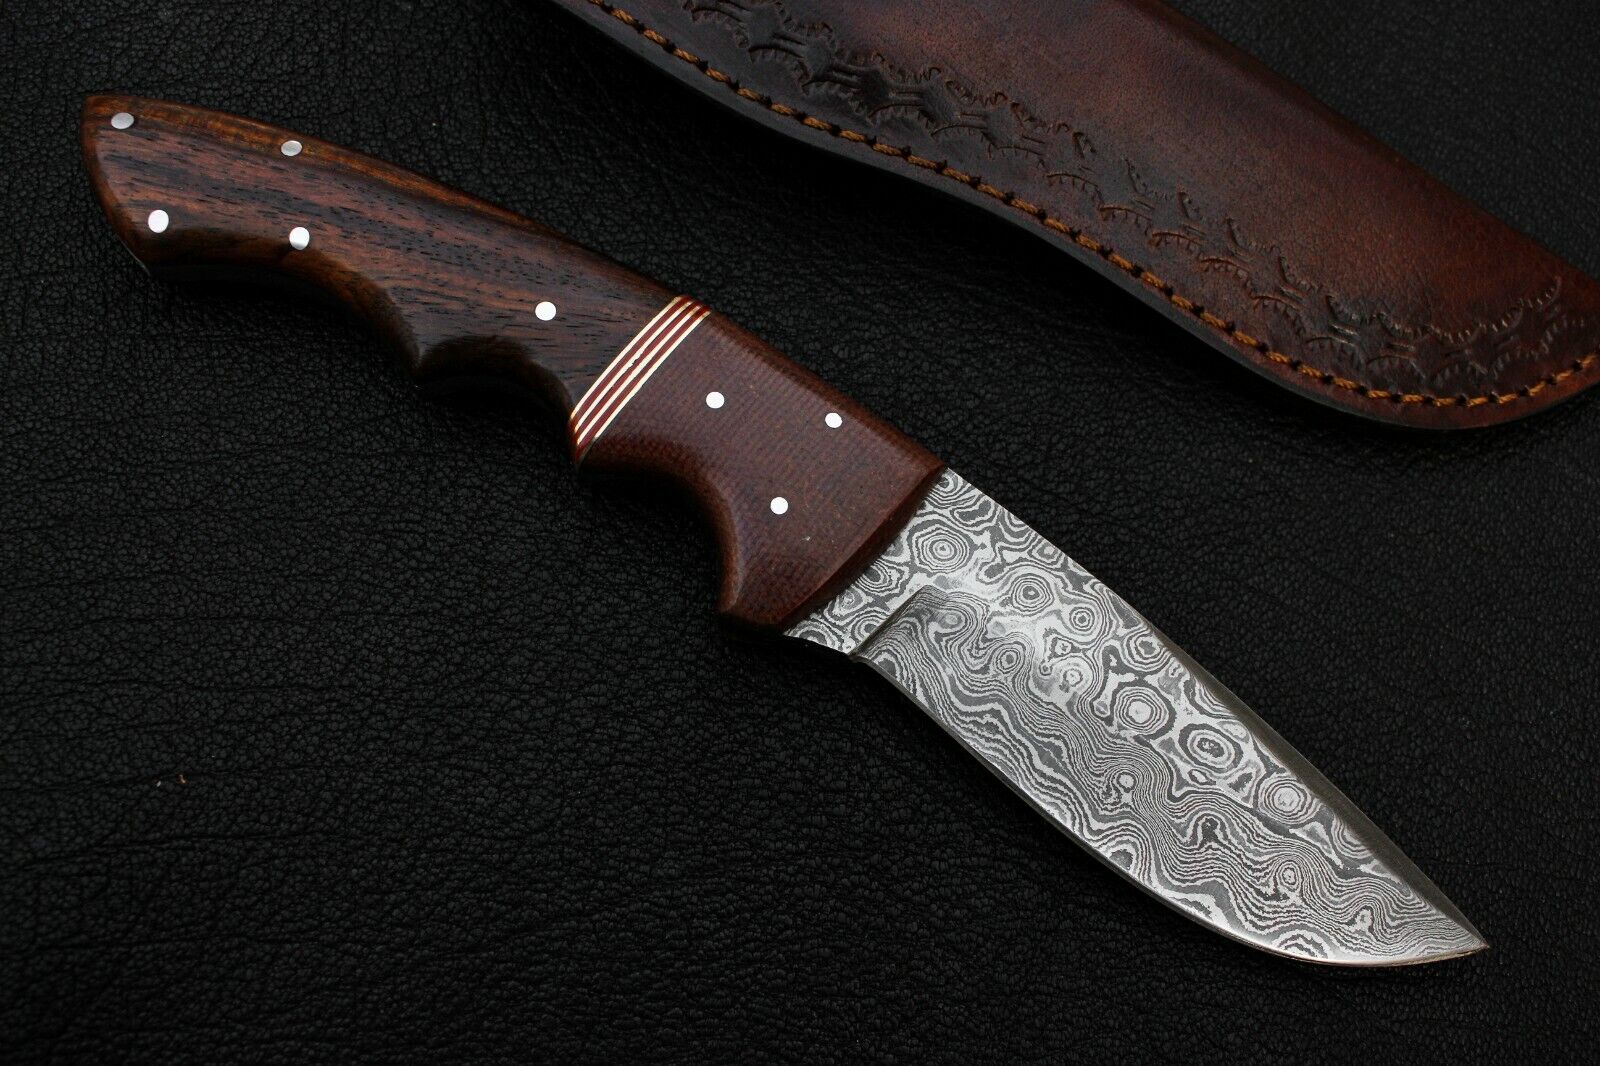 HANDMADE DAMASCUS STEEL SKINNER/HUNTING KNIFE WITH REAL COW LEATHER SHEATH1775SK